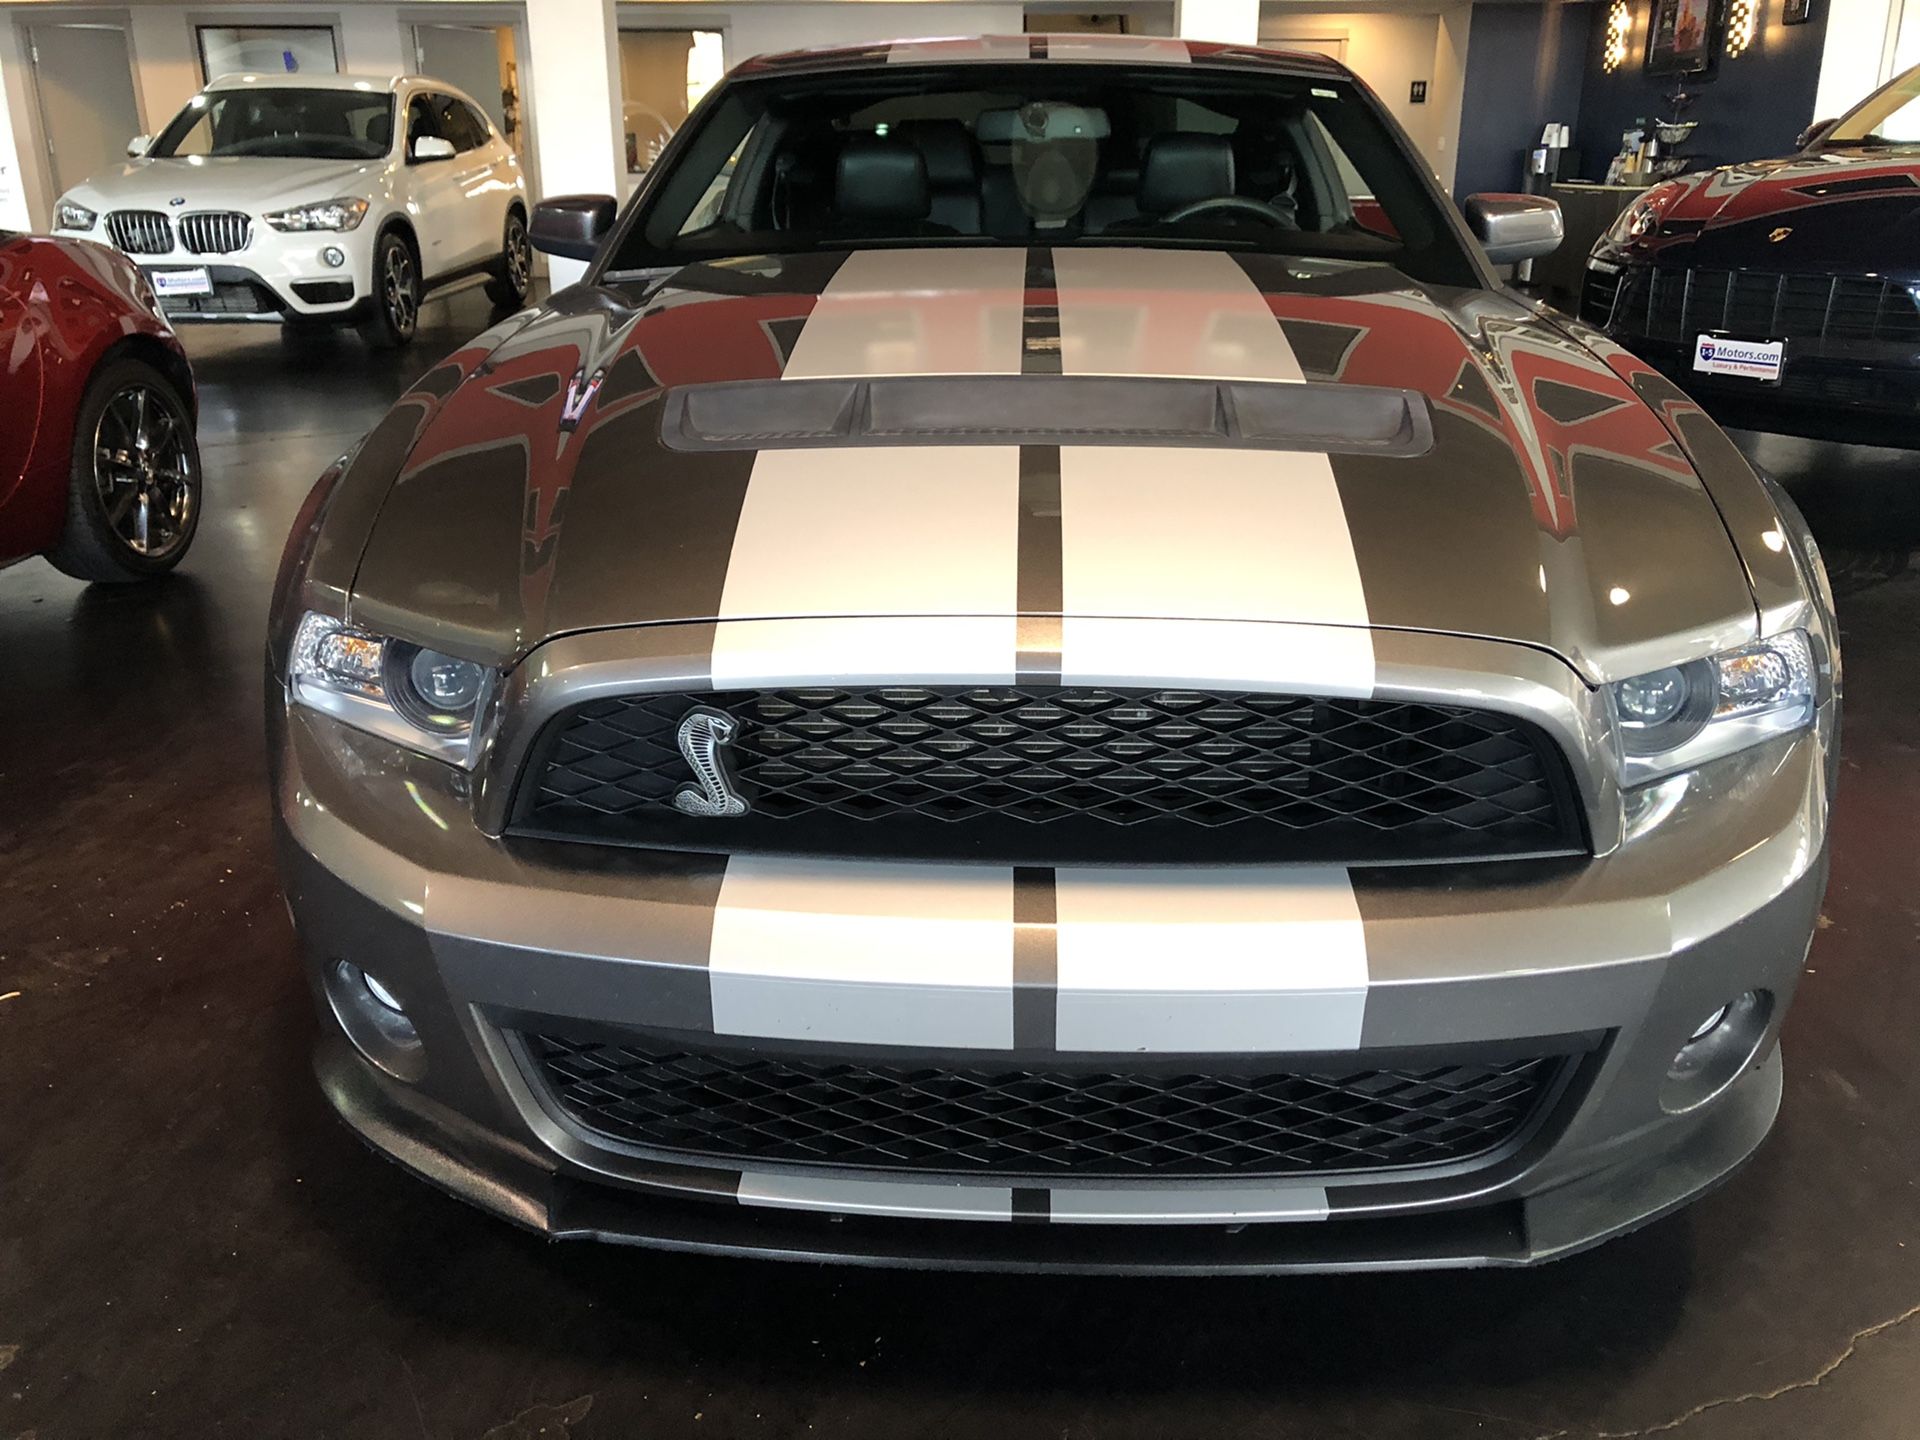 2011 Ford Shelby Gt500